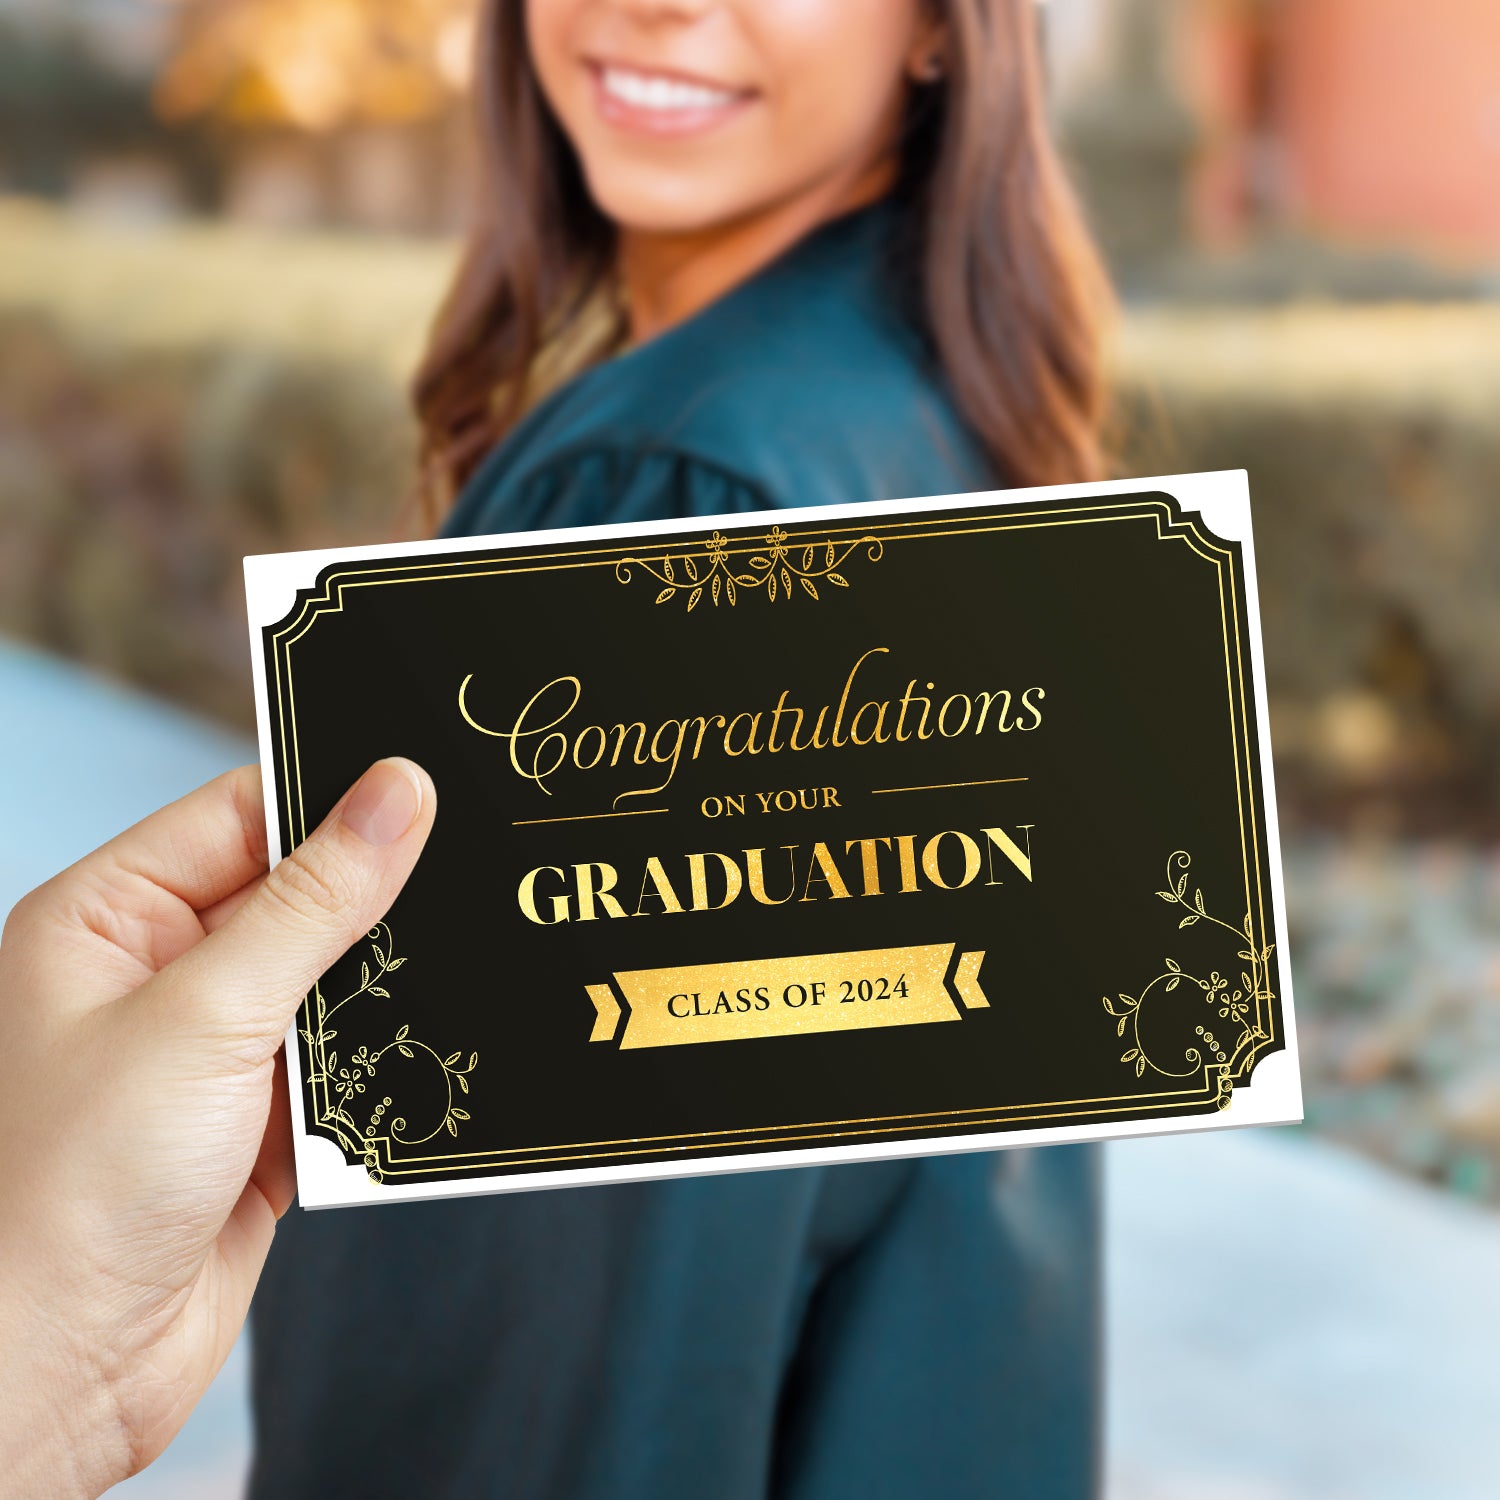 Elegant and Classic Graduation Greeting Card - Congratulations on Your Graduation, Class of 2024